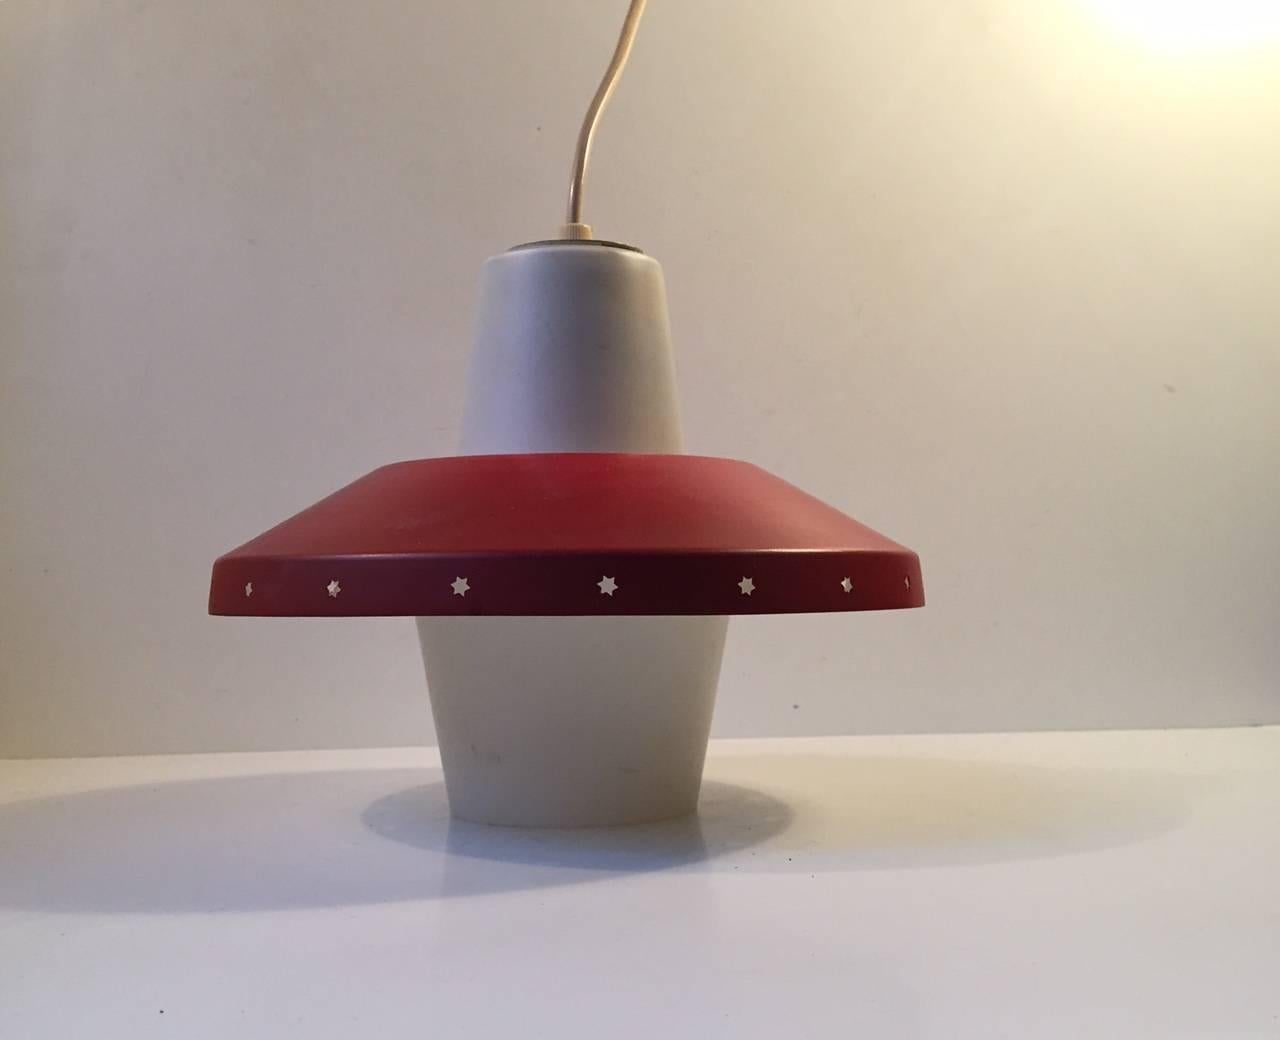 Danish ceiling light designed by Bent Karlby for Lyfa, Denmark and manufactured in the late 1950s. The light consists of red lacquered shade with perforated Stars to the edge and a bell clock shaped opaline glass center. Very nice vintage condition